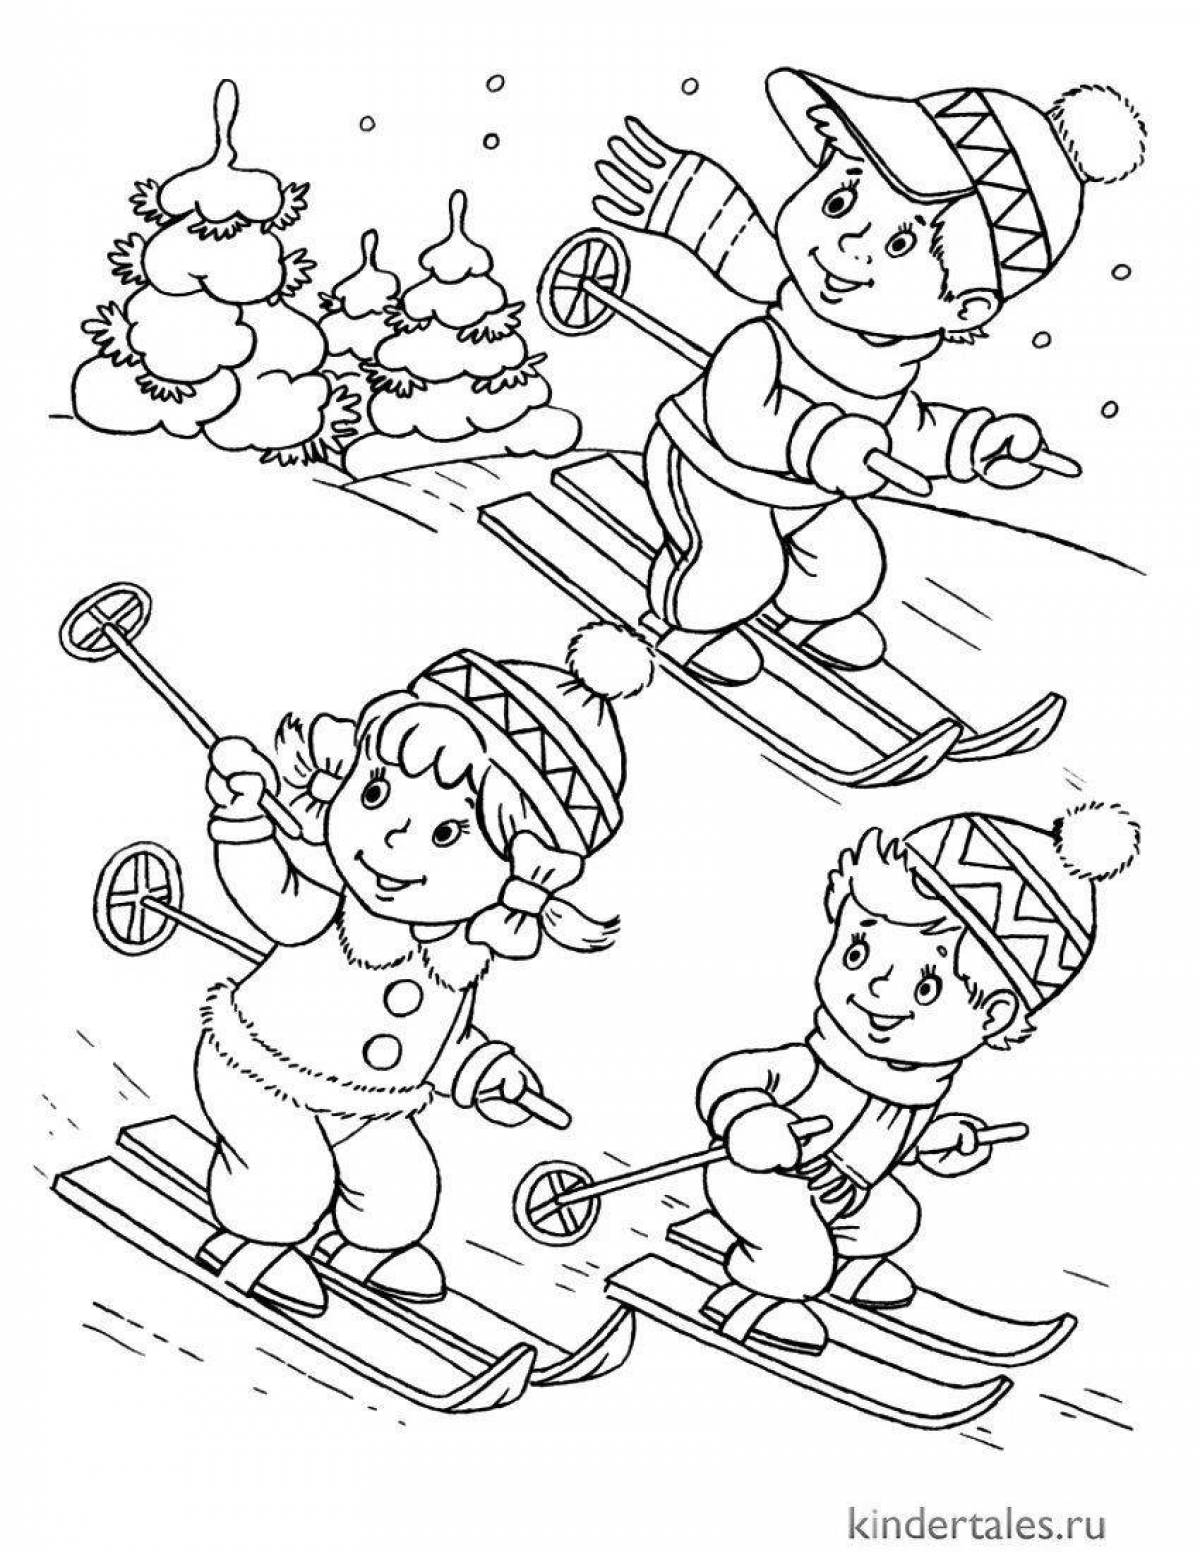 Coloring pages winter games